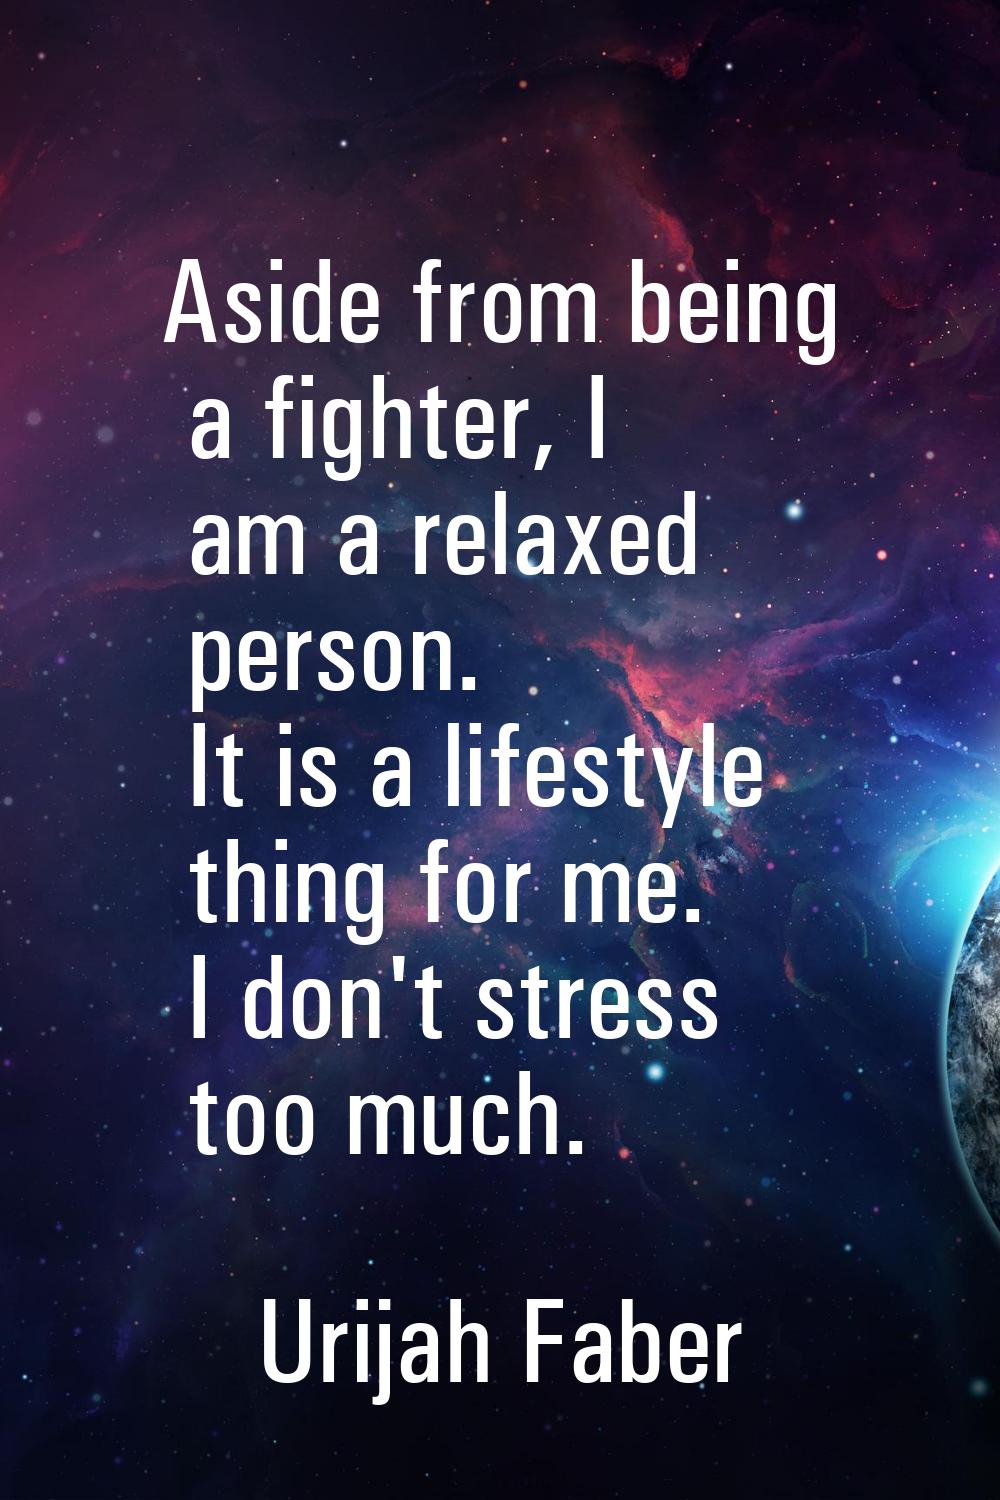 Aside from being a fighter, I am a relaxed person. It is a lifestyle thing for me. I don't stress t